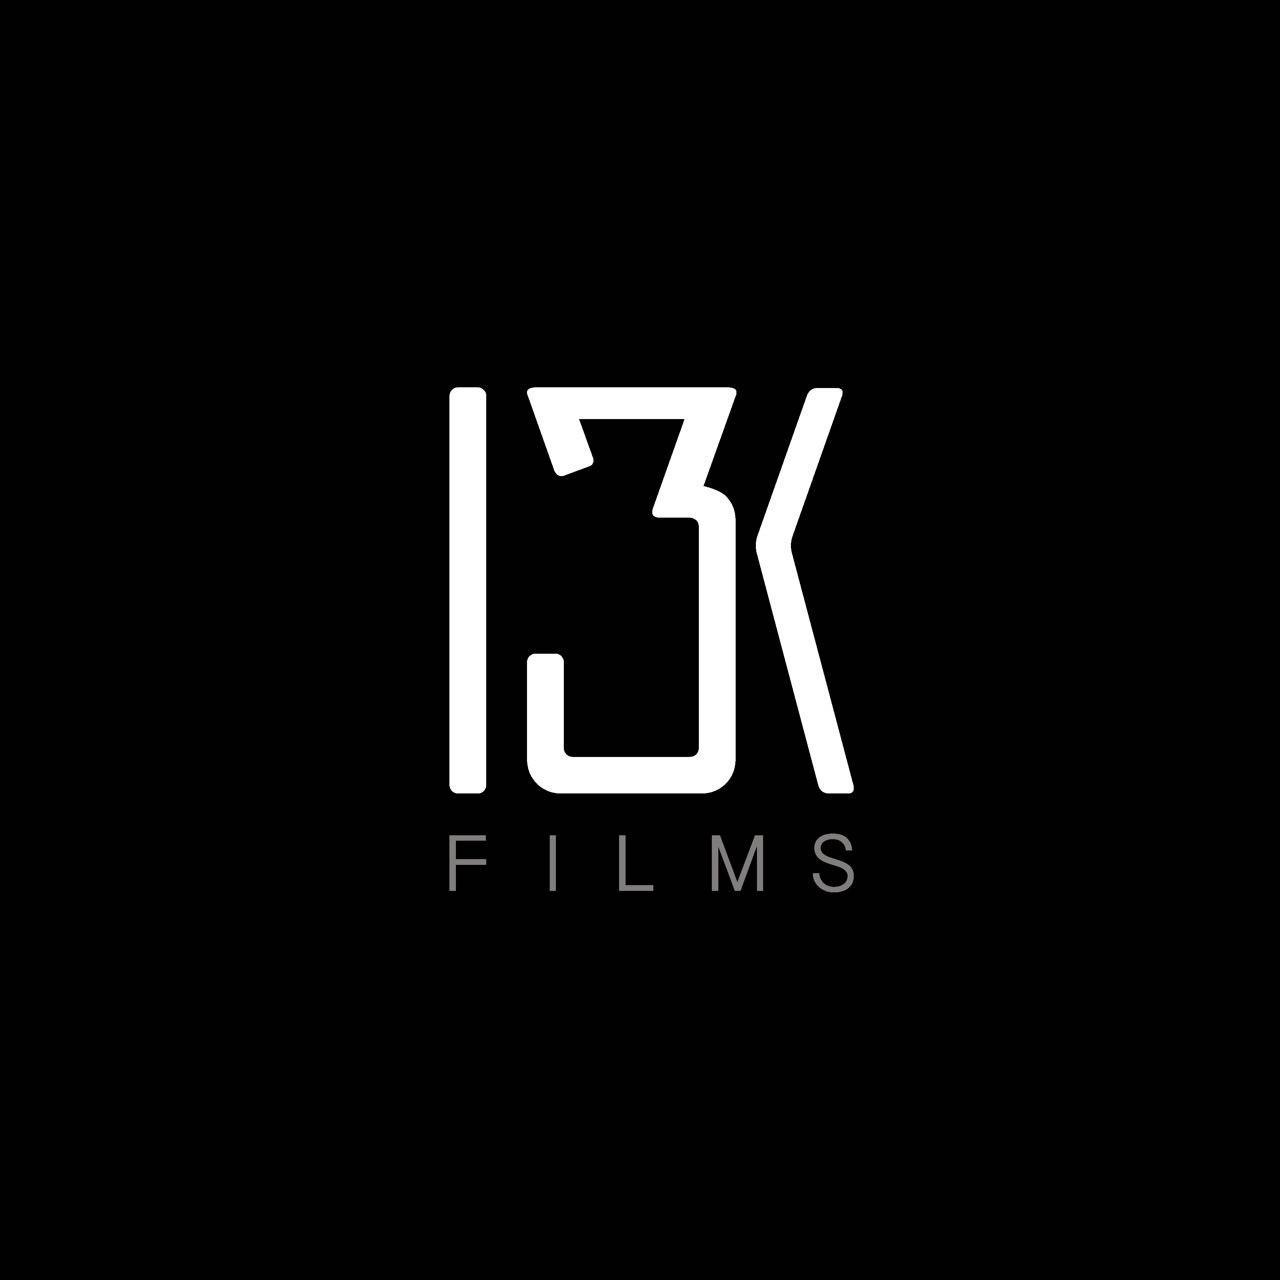 13kfilms profile on Qualified.One